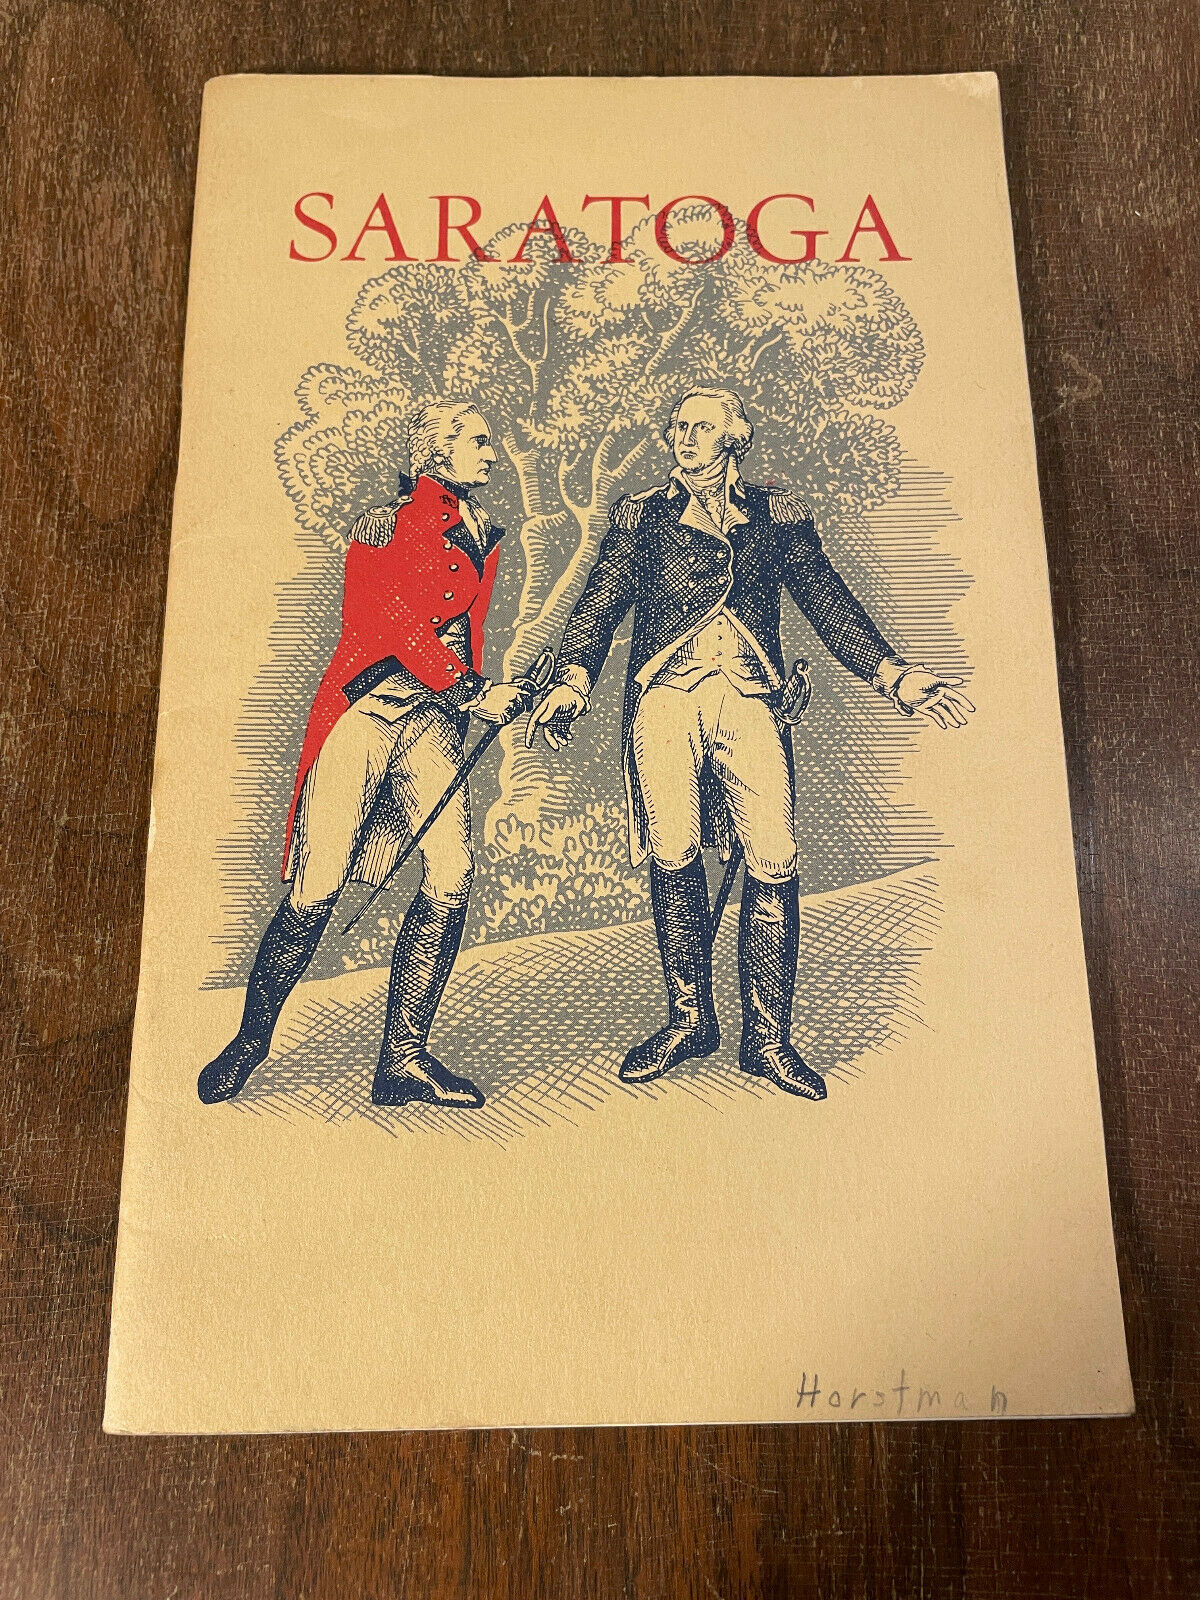 Saratoga National Historic Park System New York informational booklet 1961 (3A)